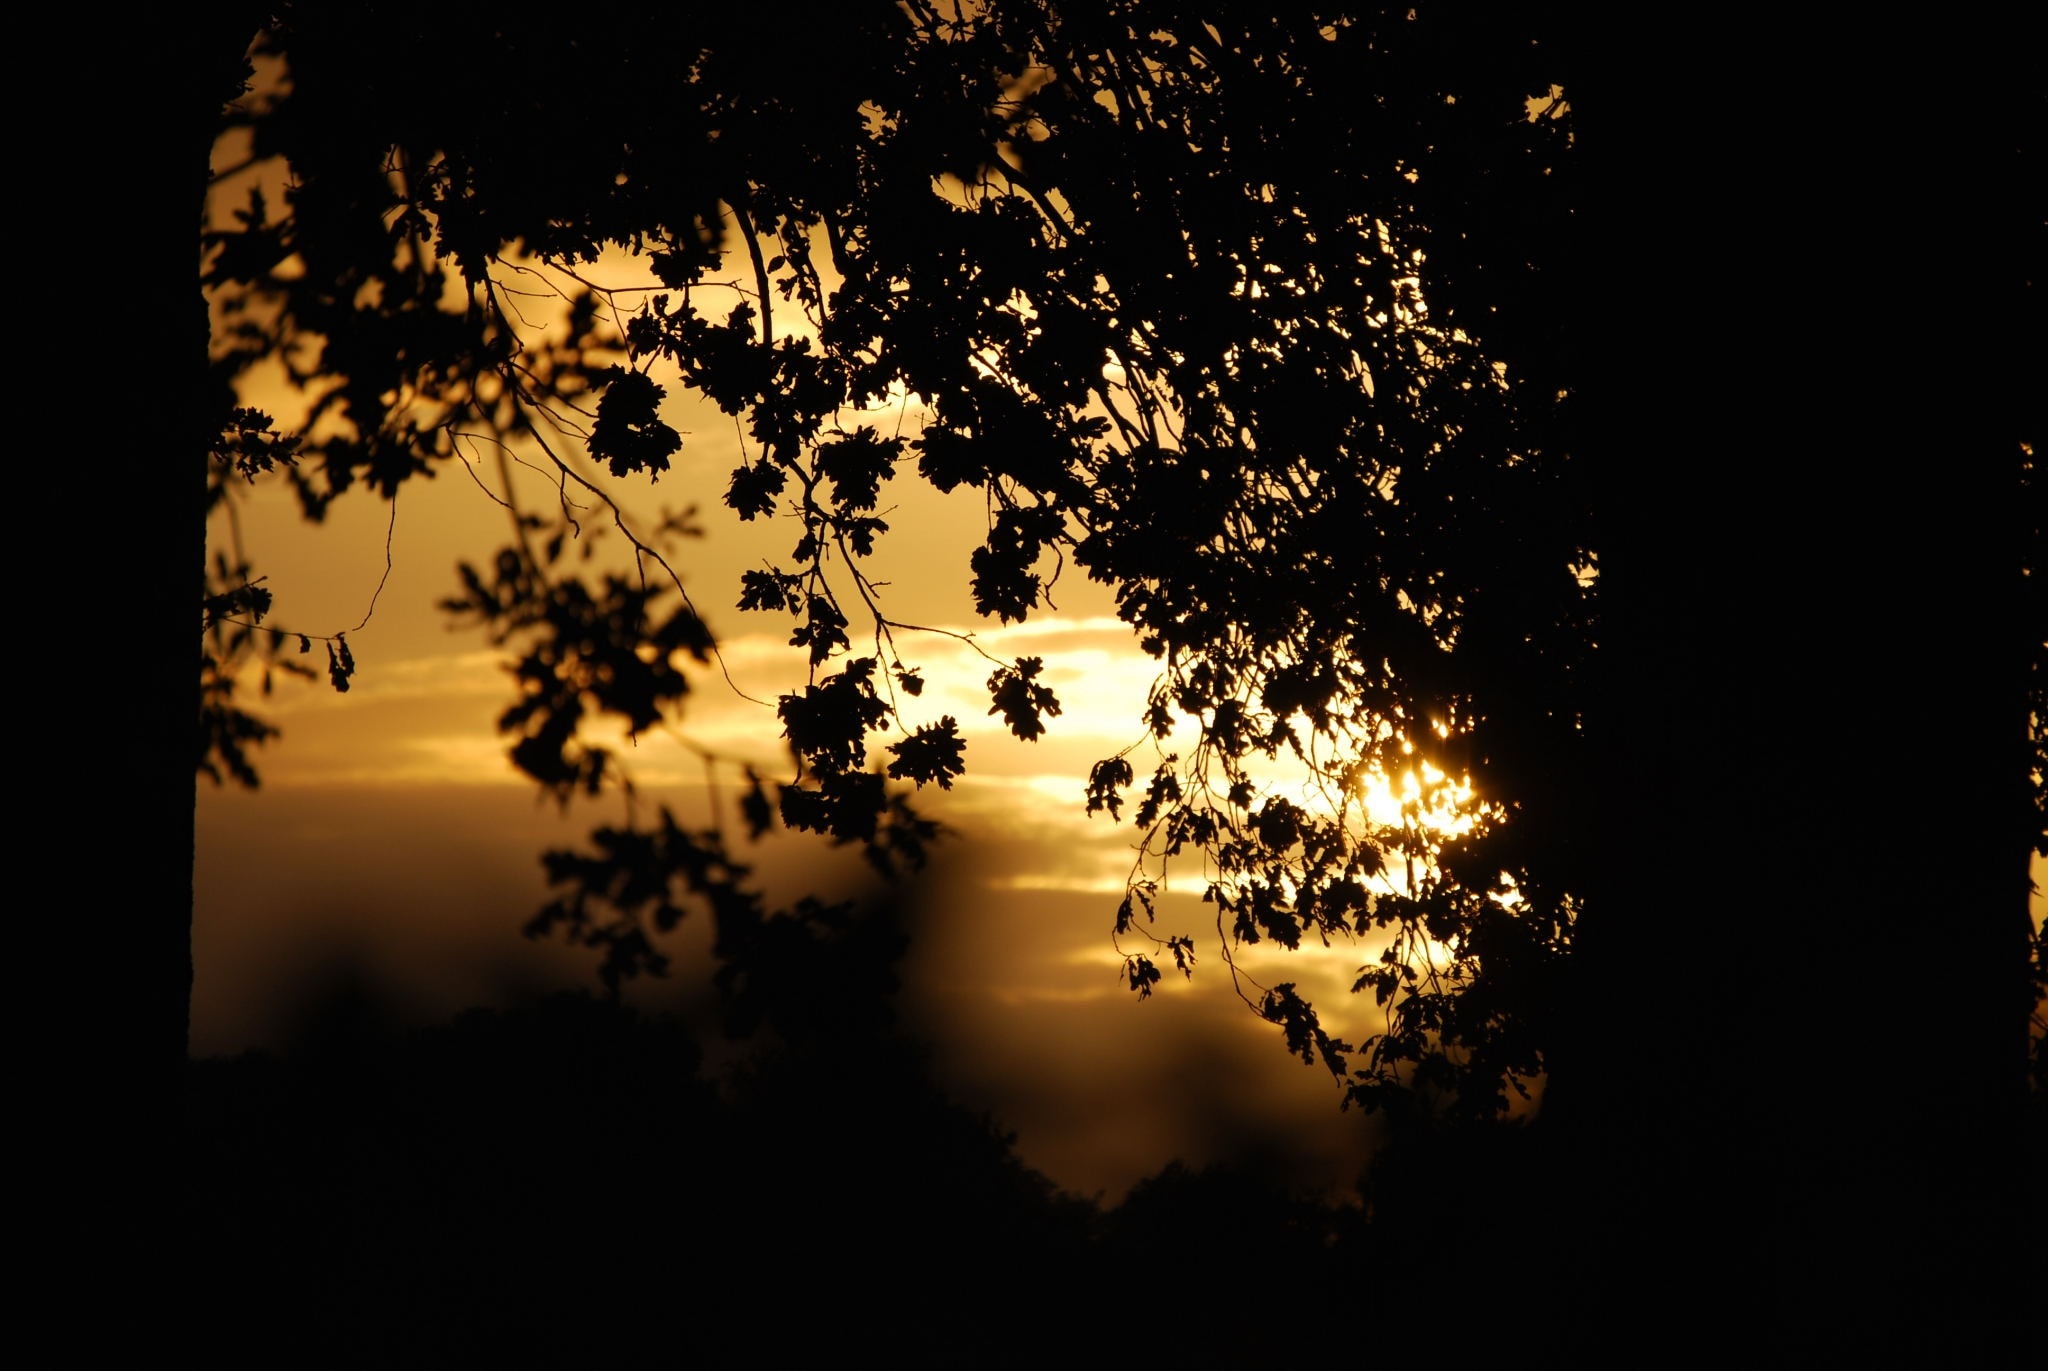 Leaves, Darkness, Shadow, Sunset, Tree, tree, tranquil scene